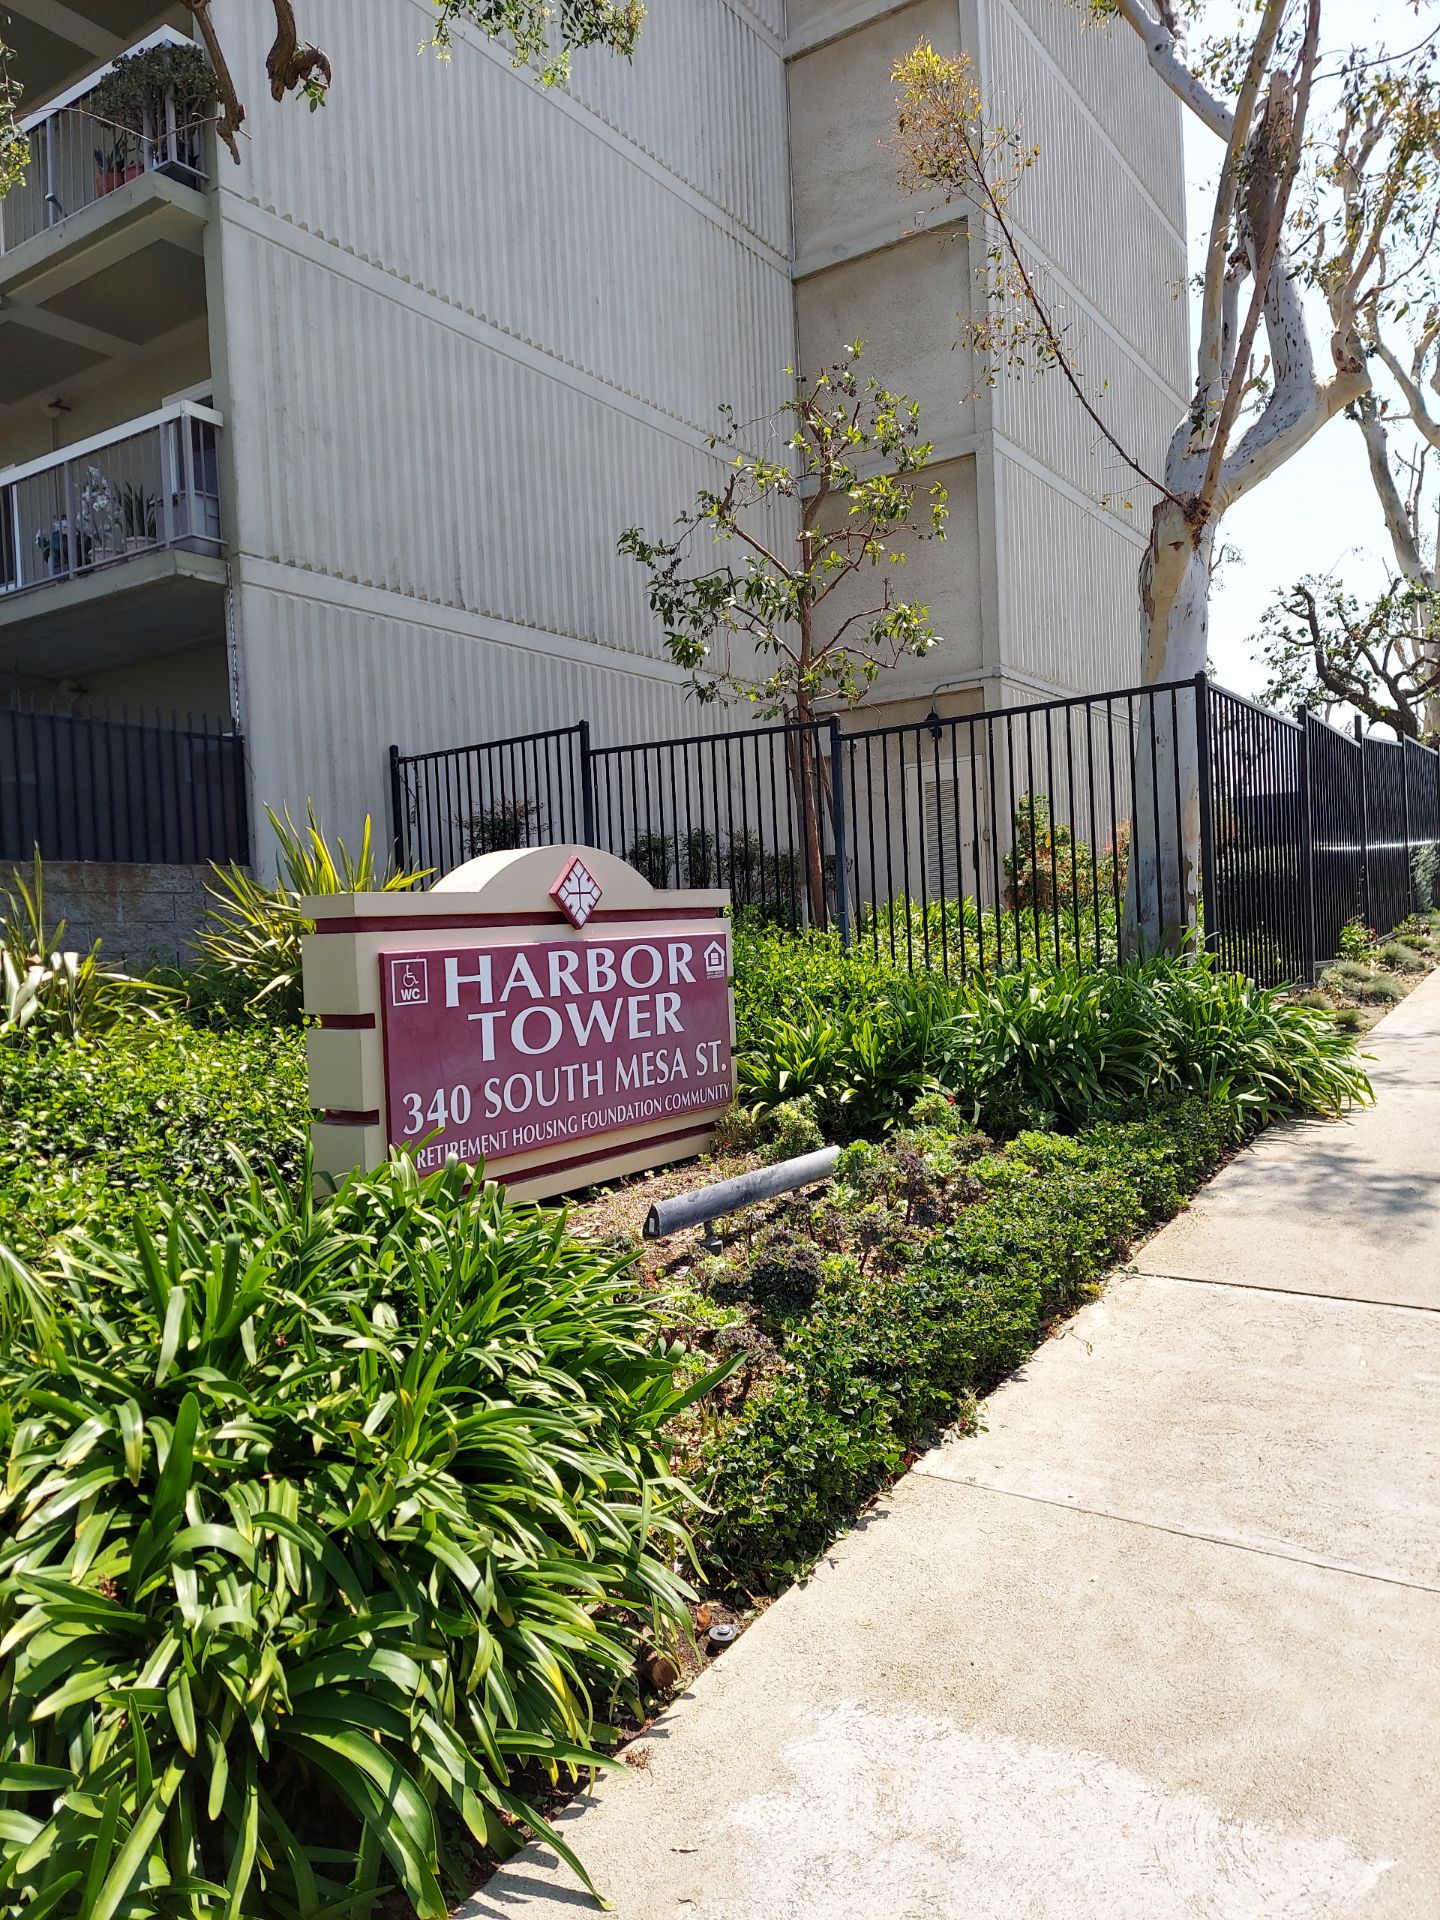 Plant area in front of a building. There is a sign in the middle that reads "Harbor Tower" and a fence in the back that separates this section with another plant section.